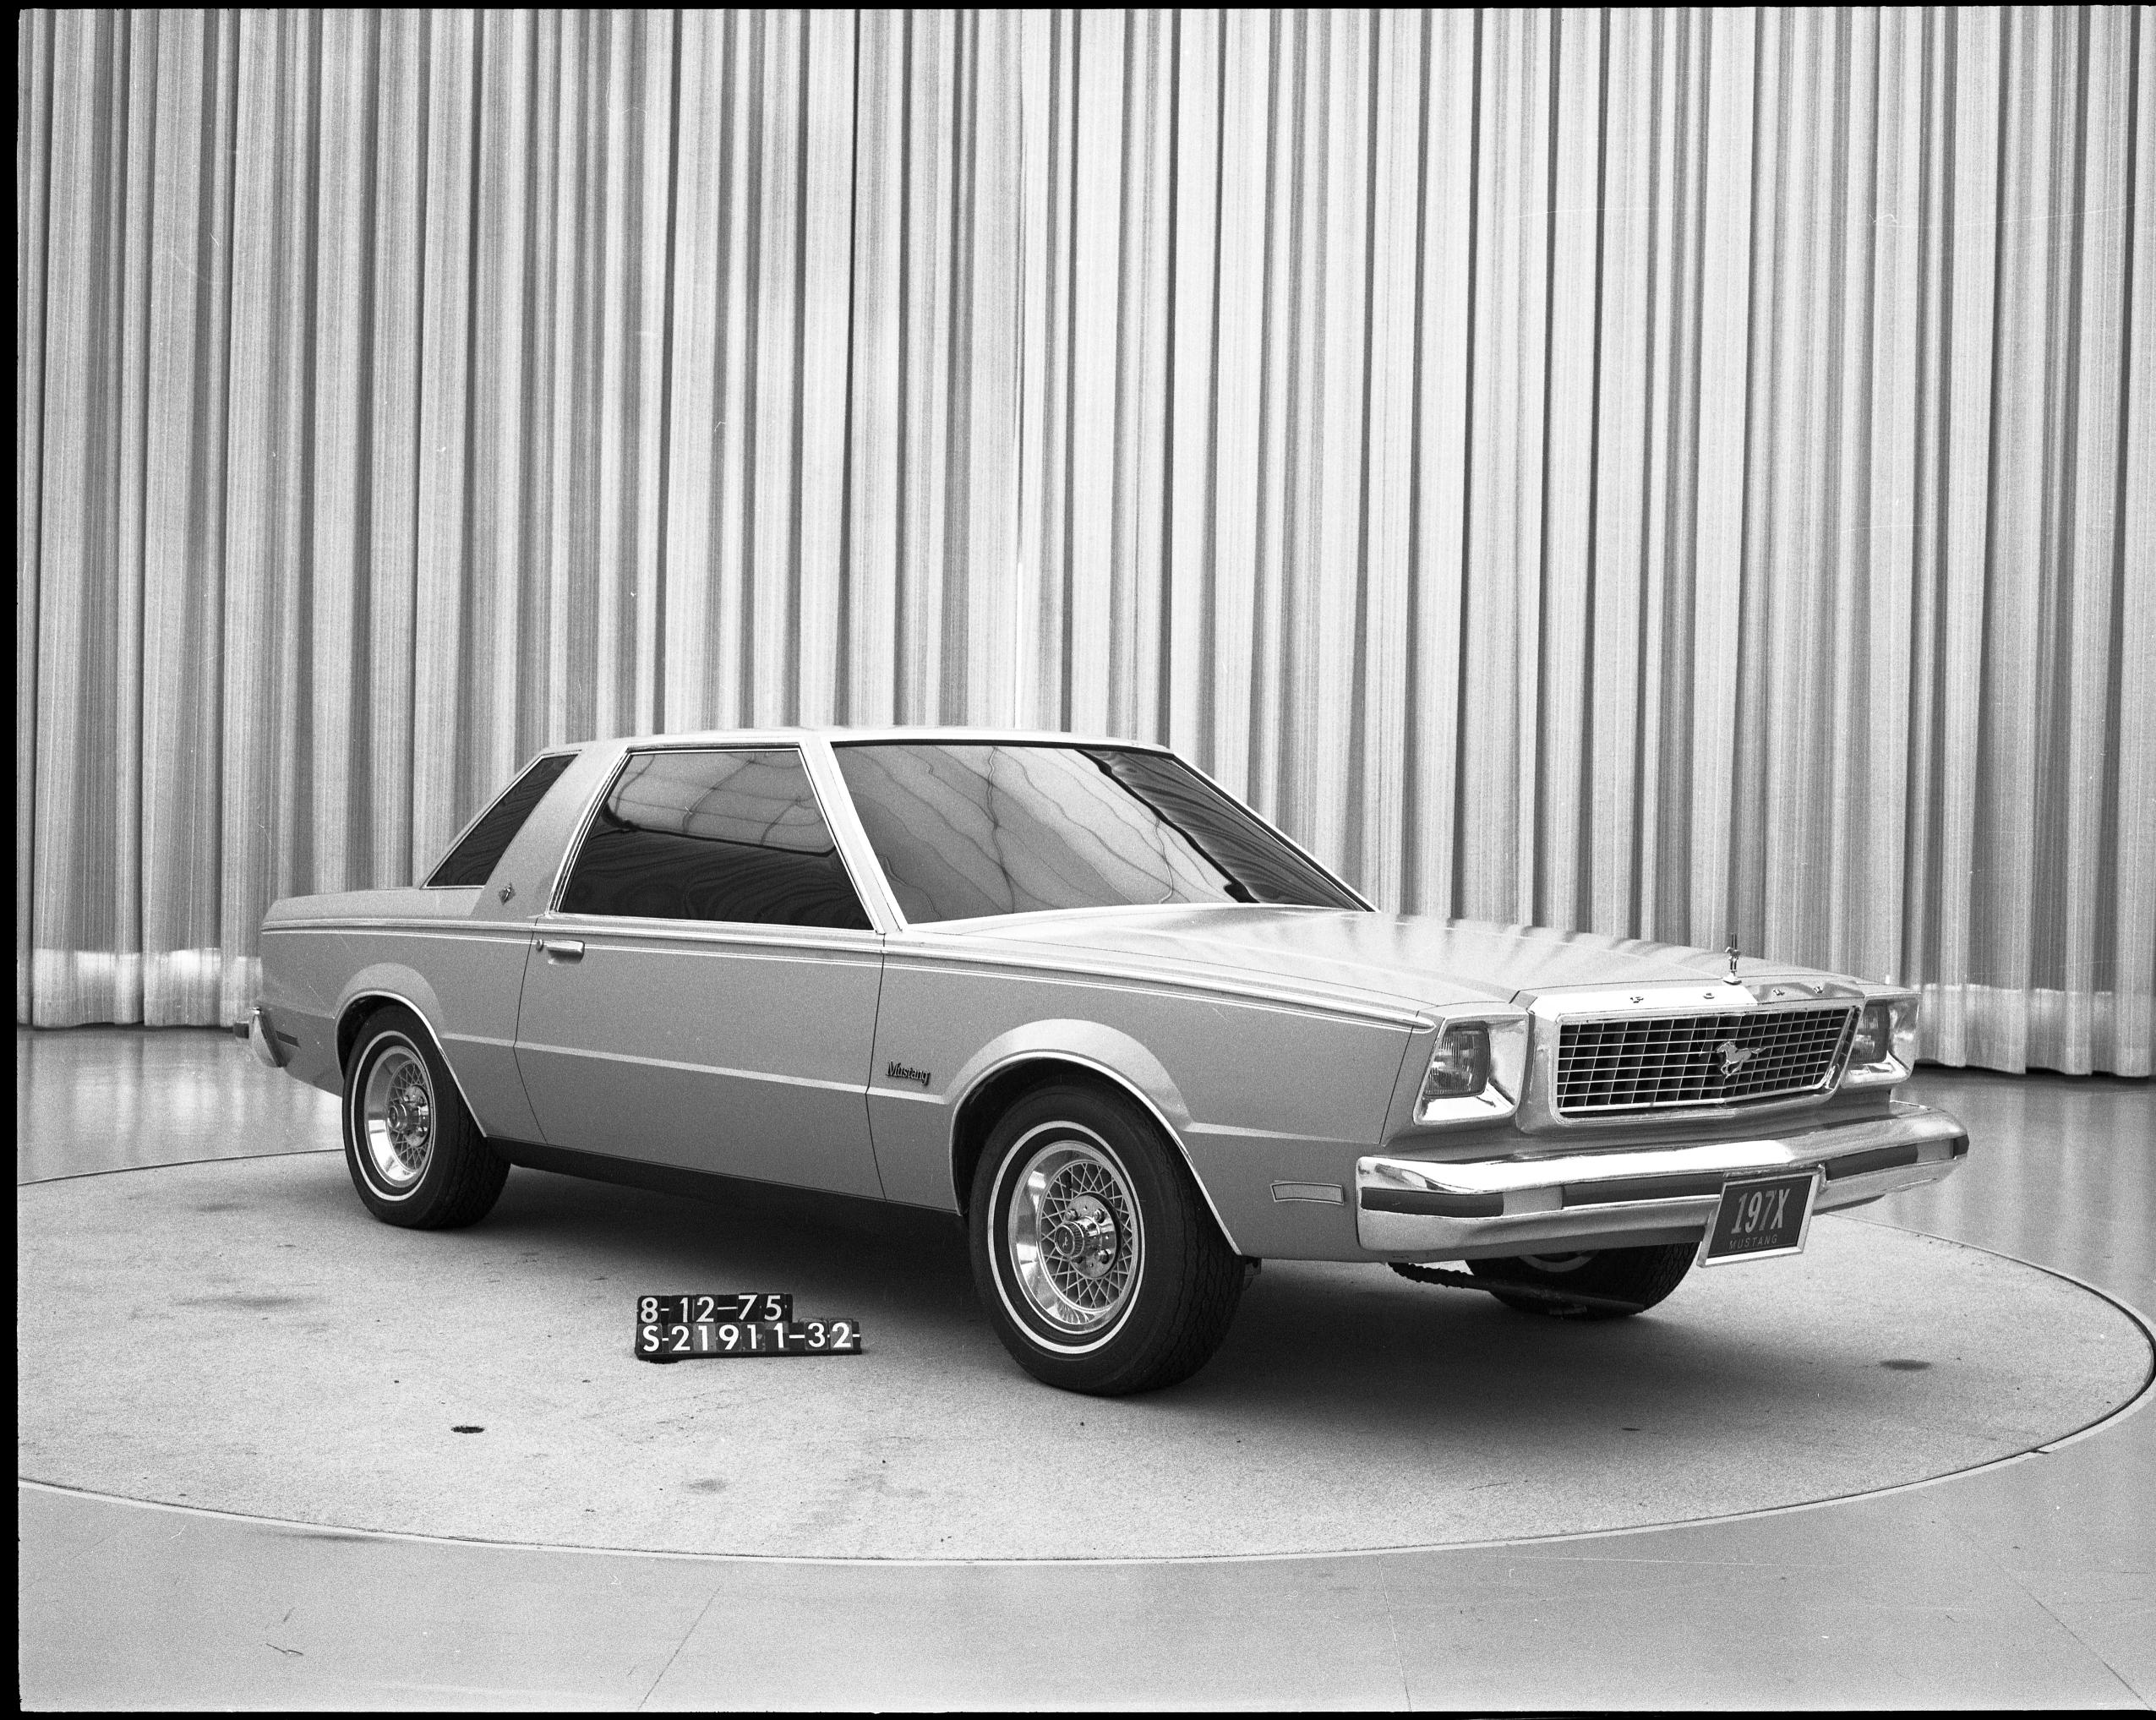 A full-scale mockup that carries over some Mustang II front end styling elements in a squared-off, more formal treatment